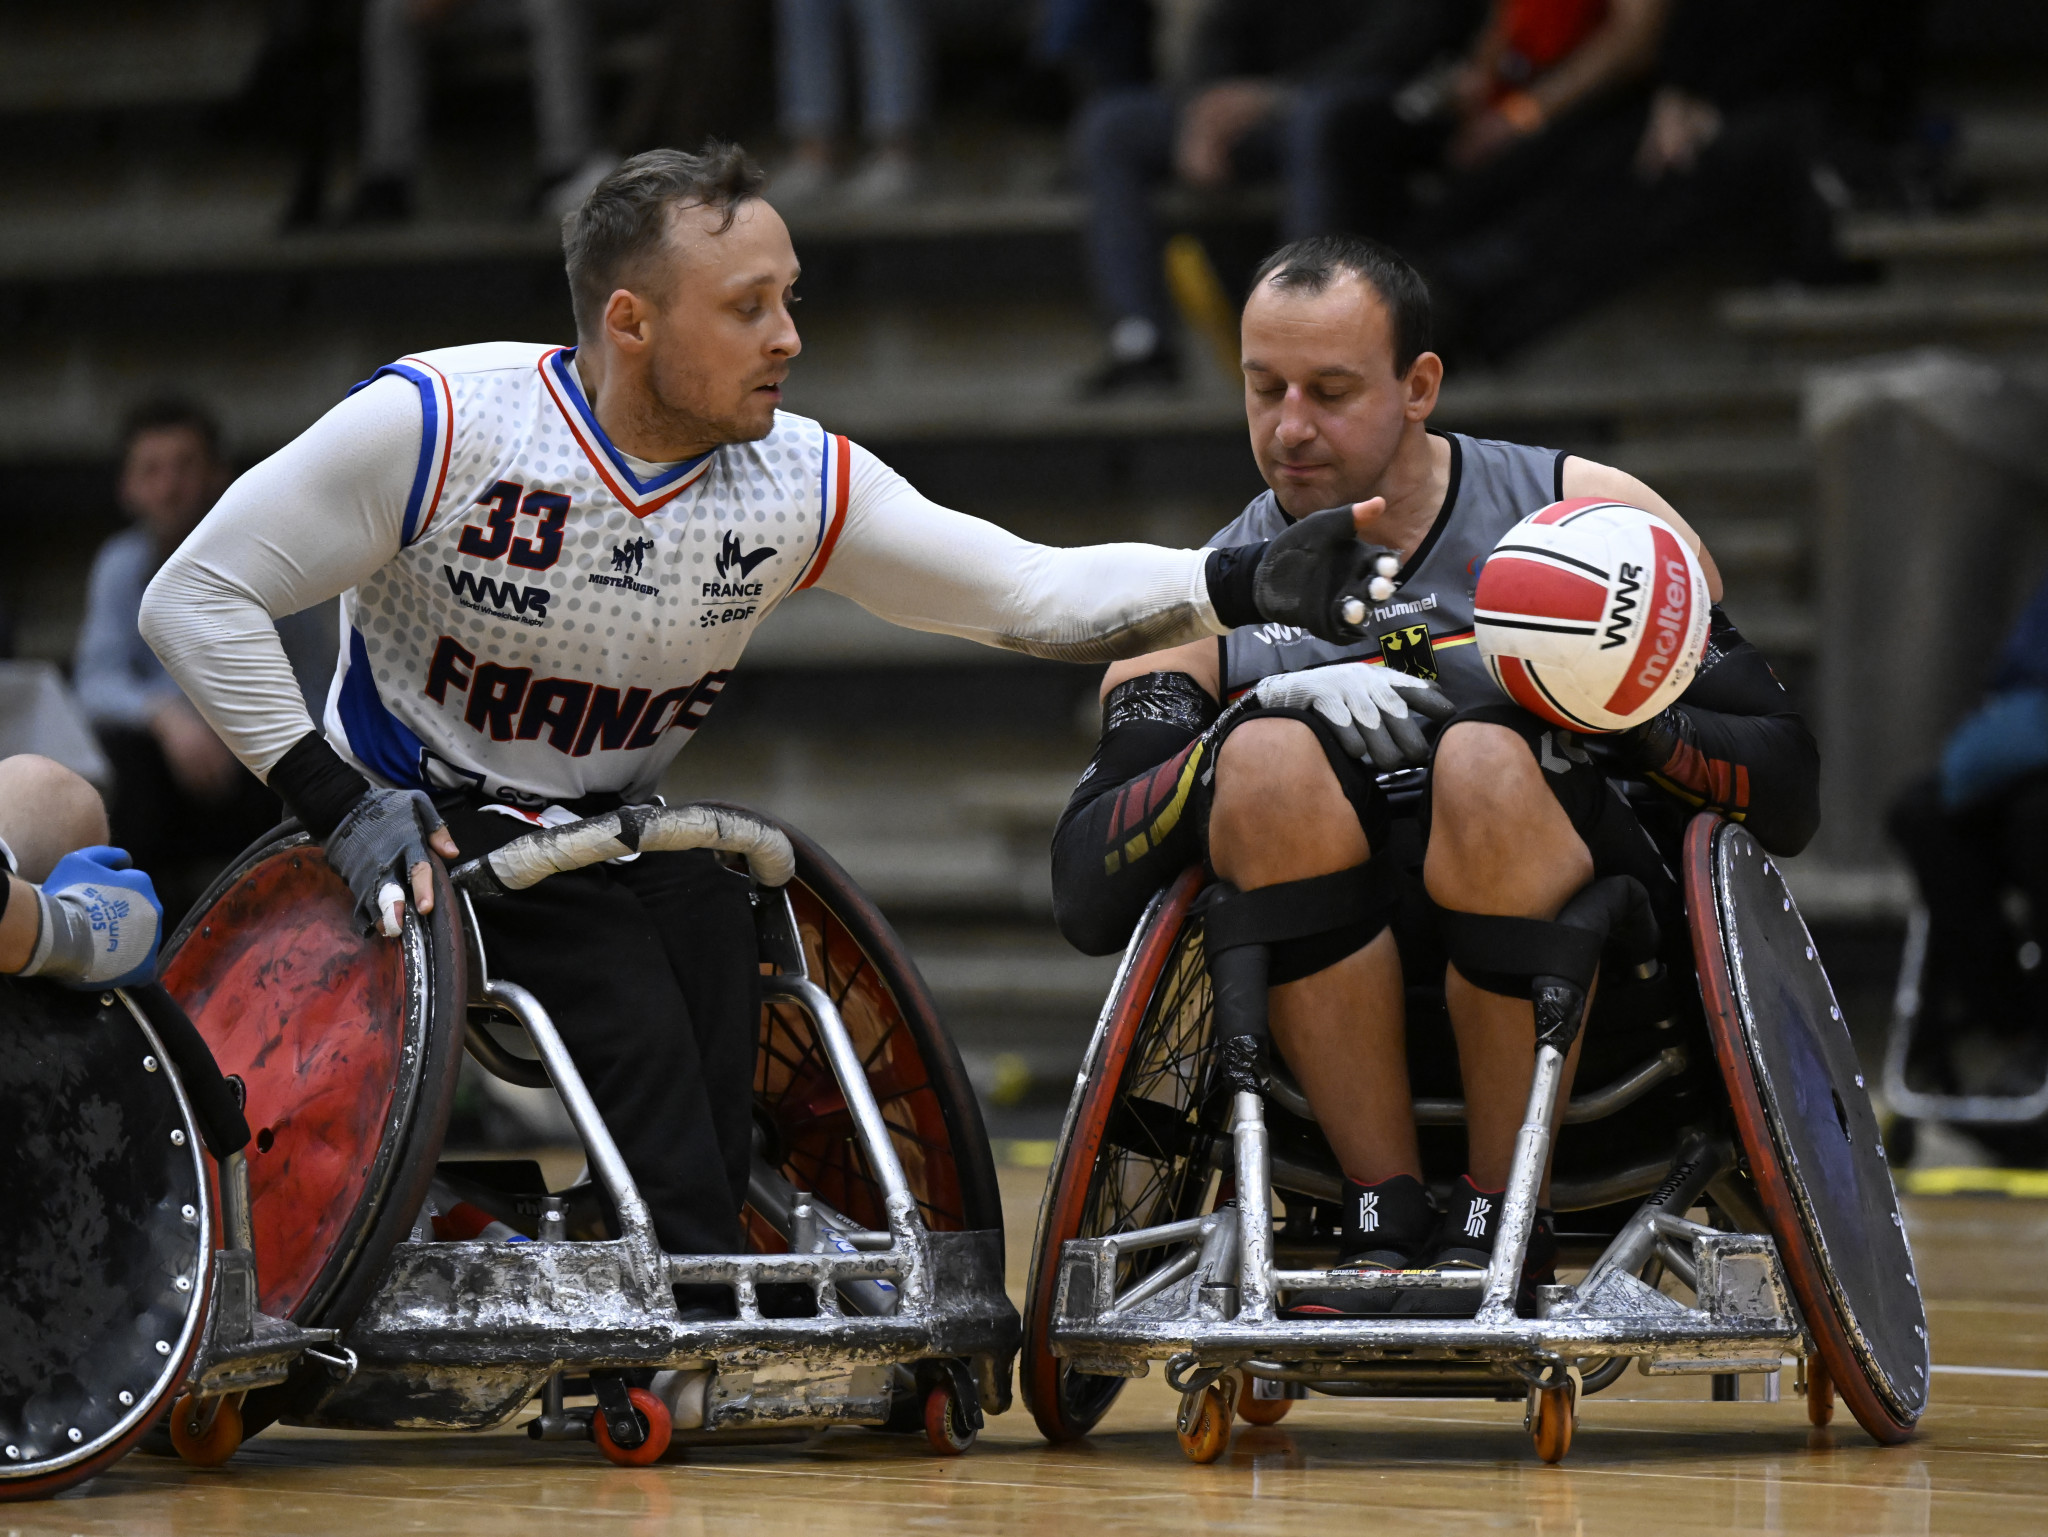 The World Wheelchair Rugby Championship is being hosted in Vejle ©Lars Møller/Parasport Denmark